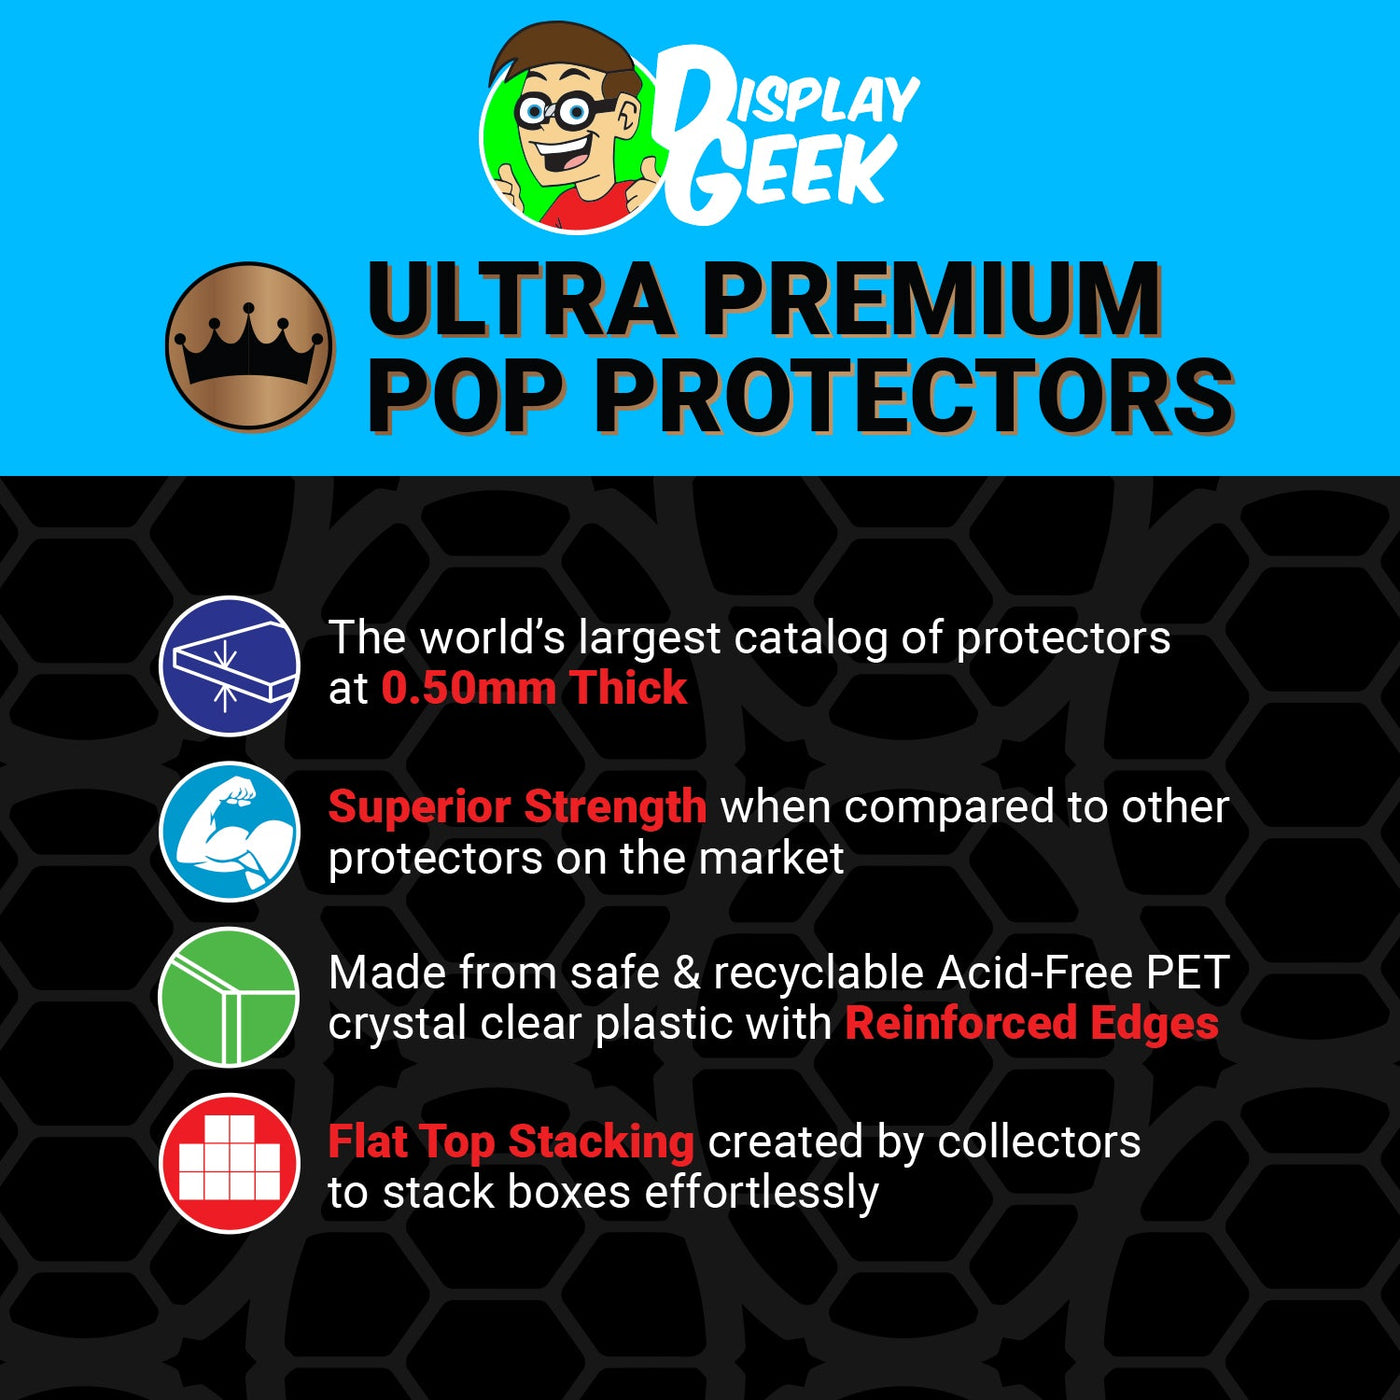 Pop Protector for The Ronin and B5-56 Glow #502 Funko Pop Deluxe on The Protector Guide App by Display Geek